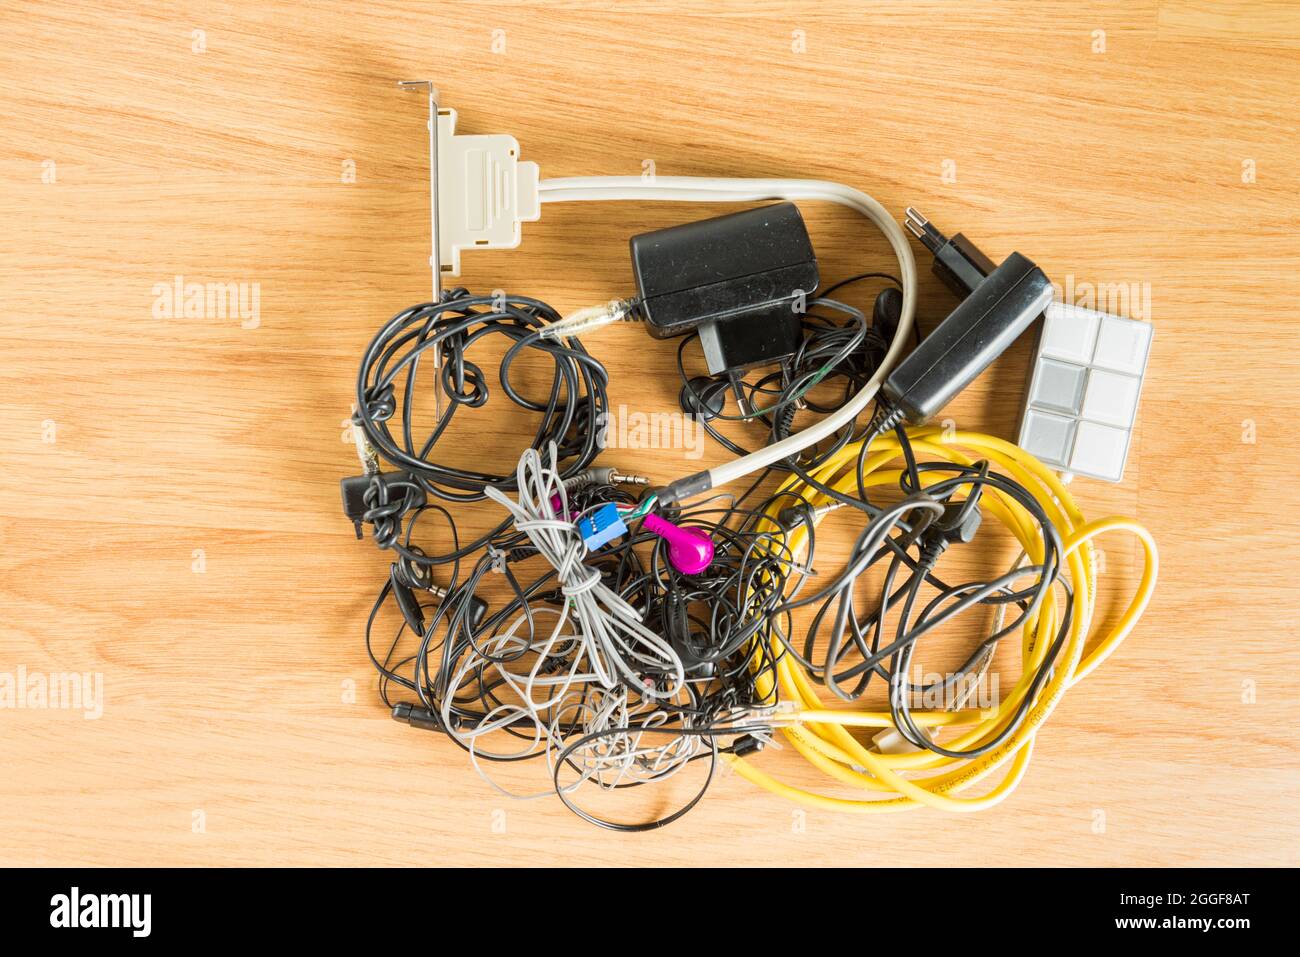 Obsolete electronic and technological objects arranged on a parquet floor. Technological waste and its recycling is one of the problems to be tackled Stock Photo